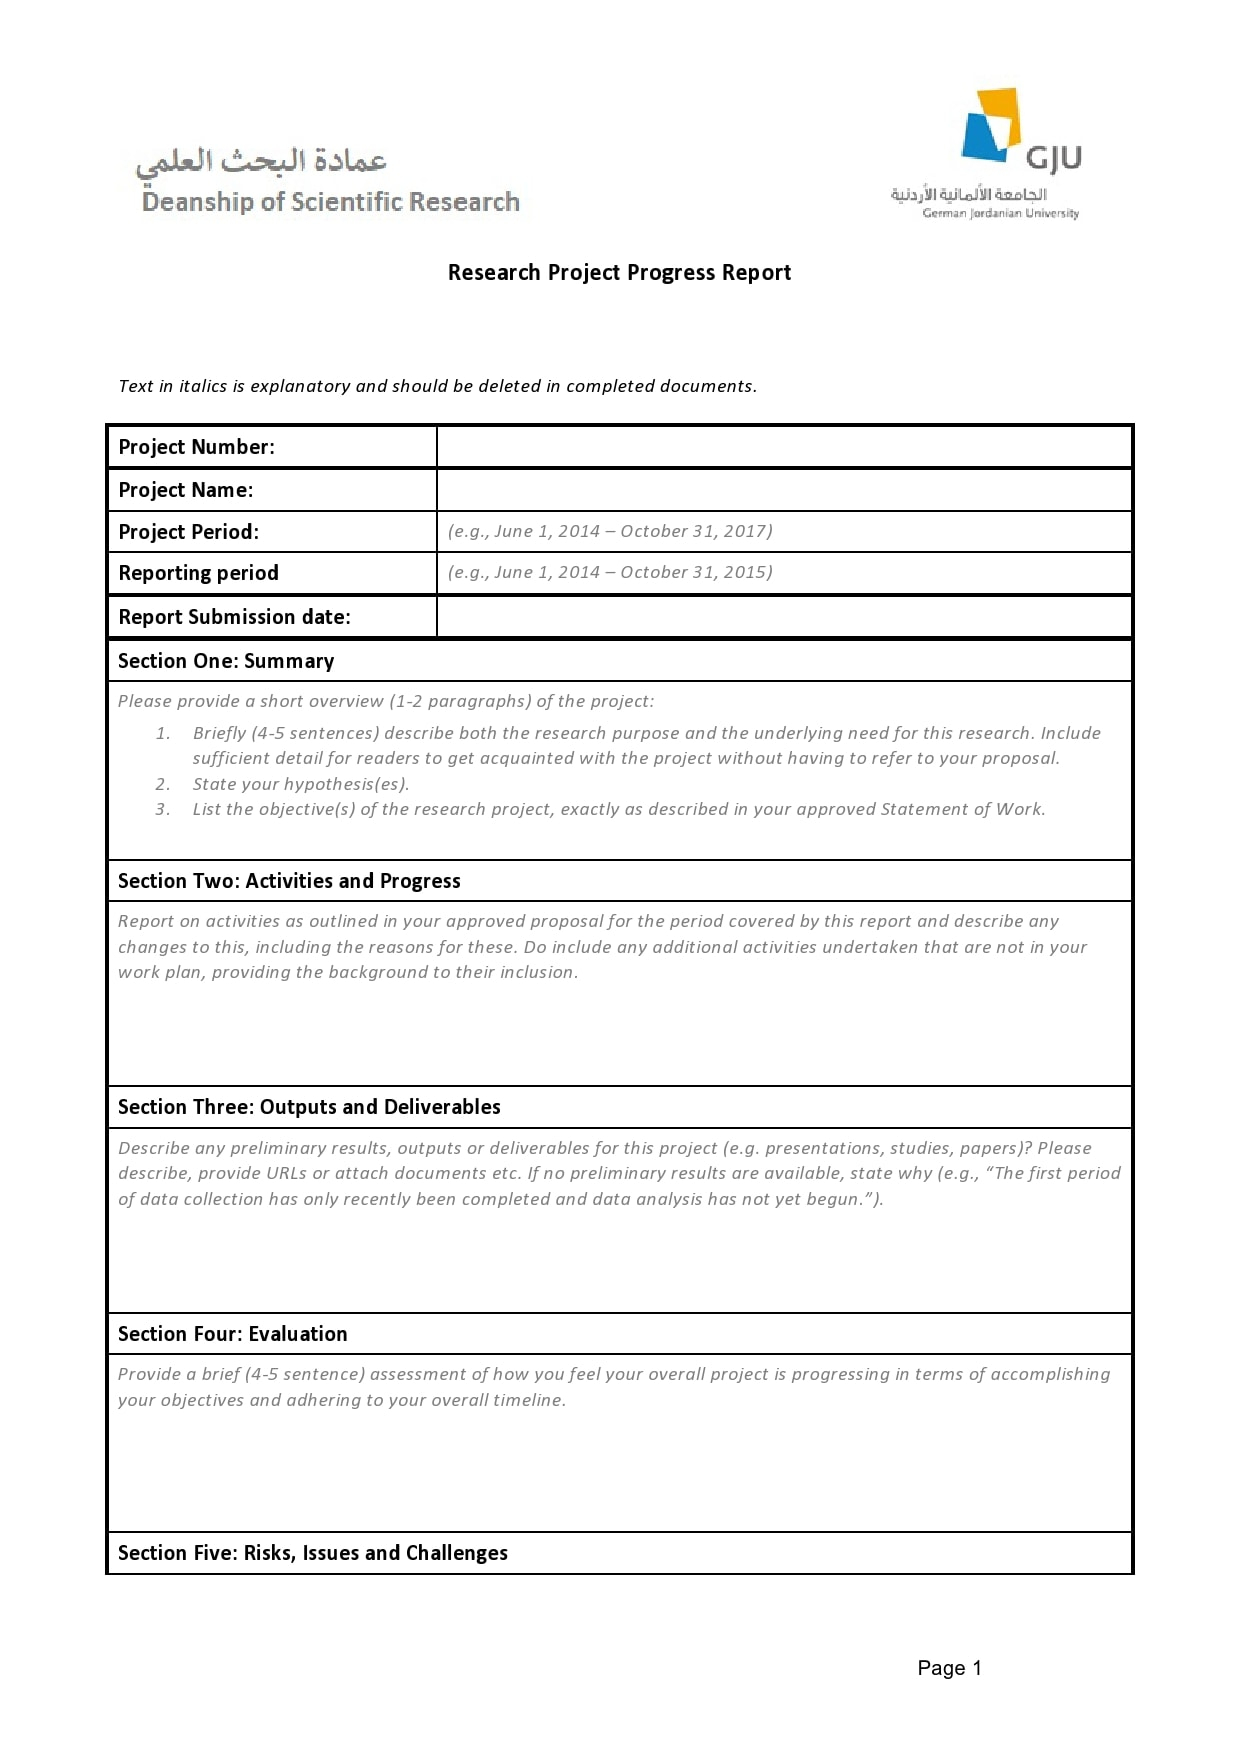 10 Professional Progress Report Templates (Free) - TemplateArchive Intended For Research Project Progress Report Template